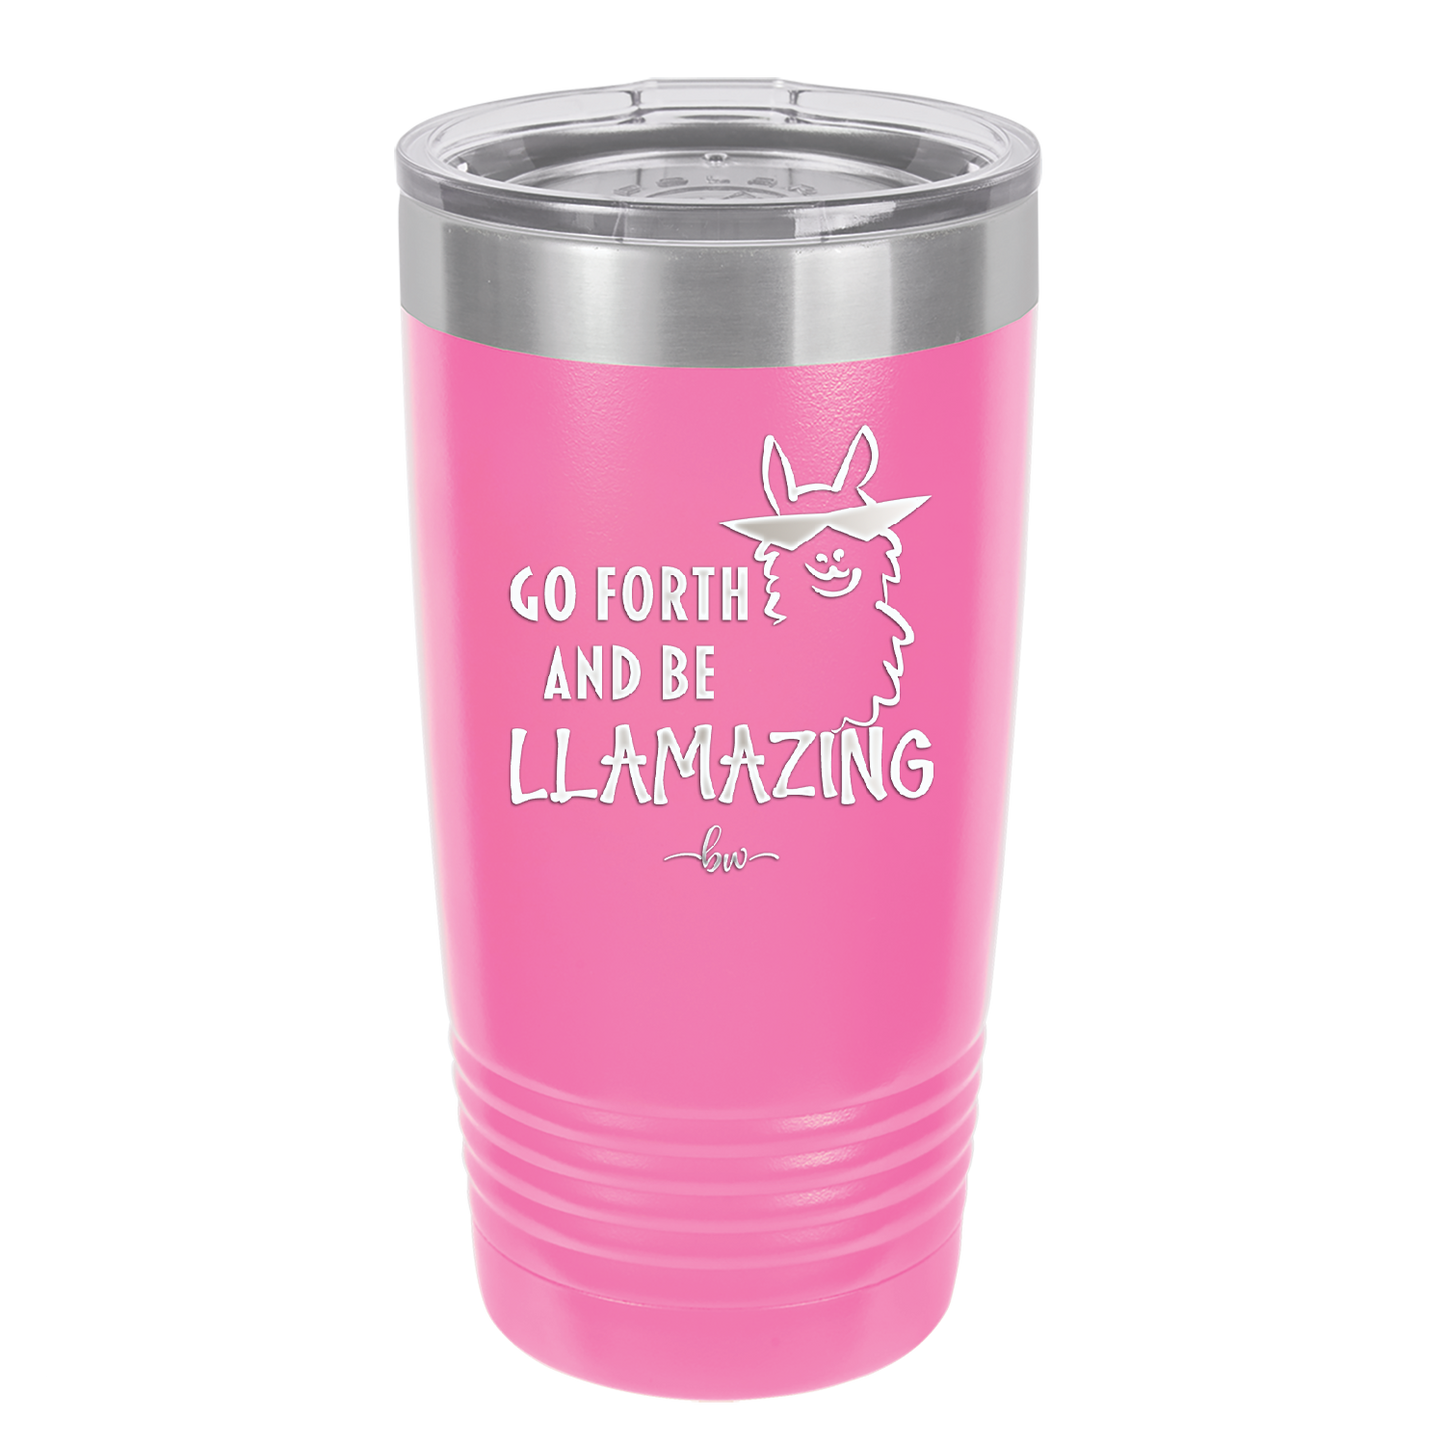 Go Forth and Be Llamazing - Laser Engraved Stainless Steel Drinkware - 1874 -